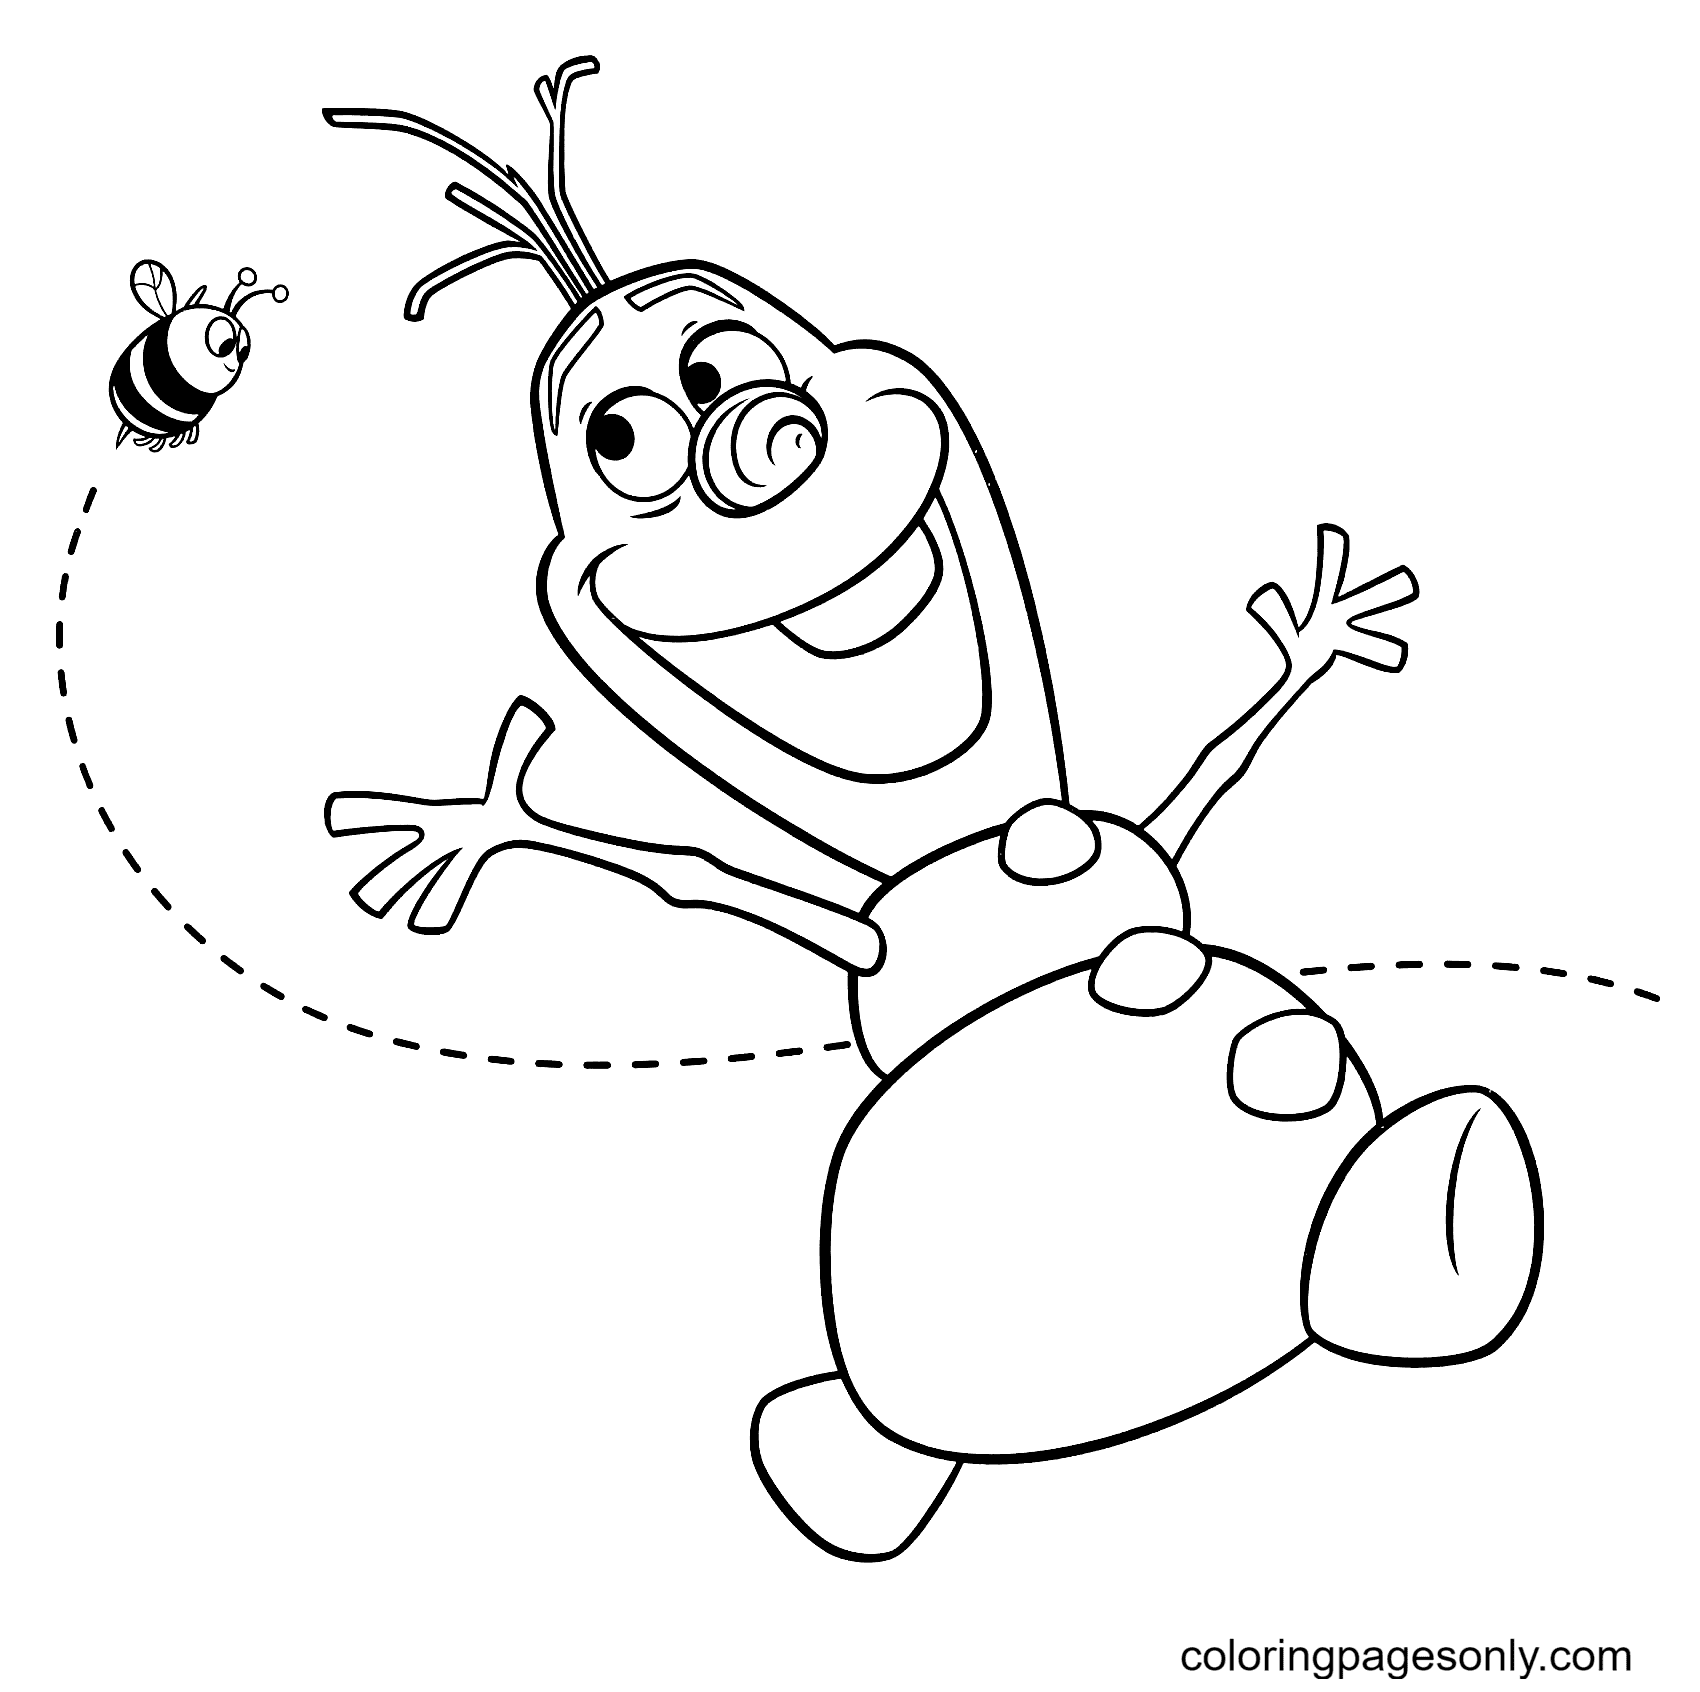 Snowman Olaf Playing with a Bee Coloring Pages